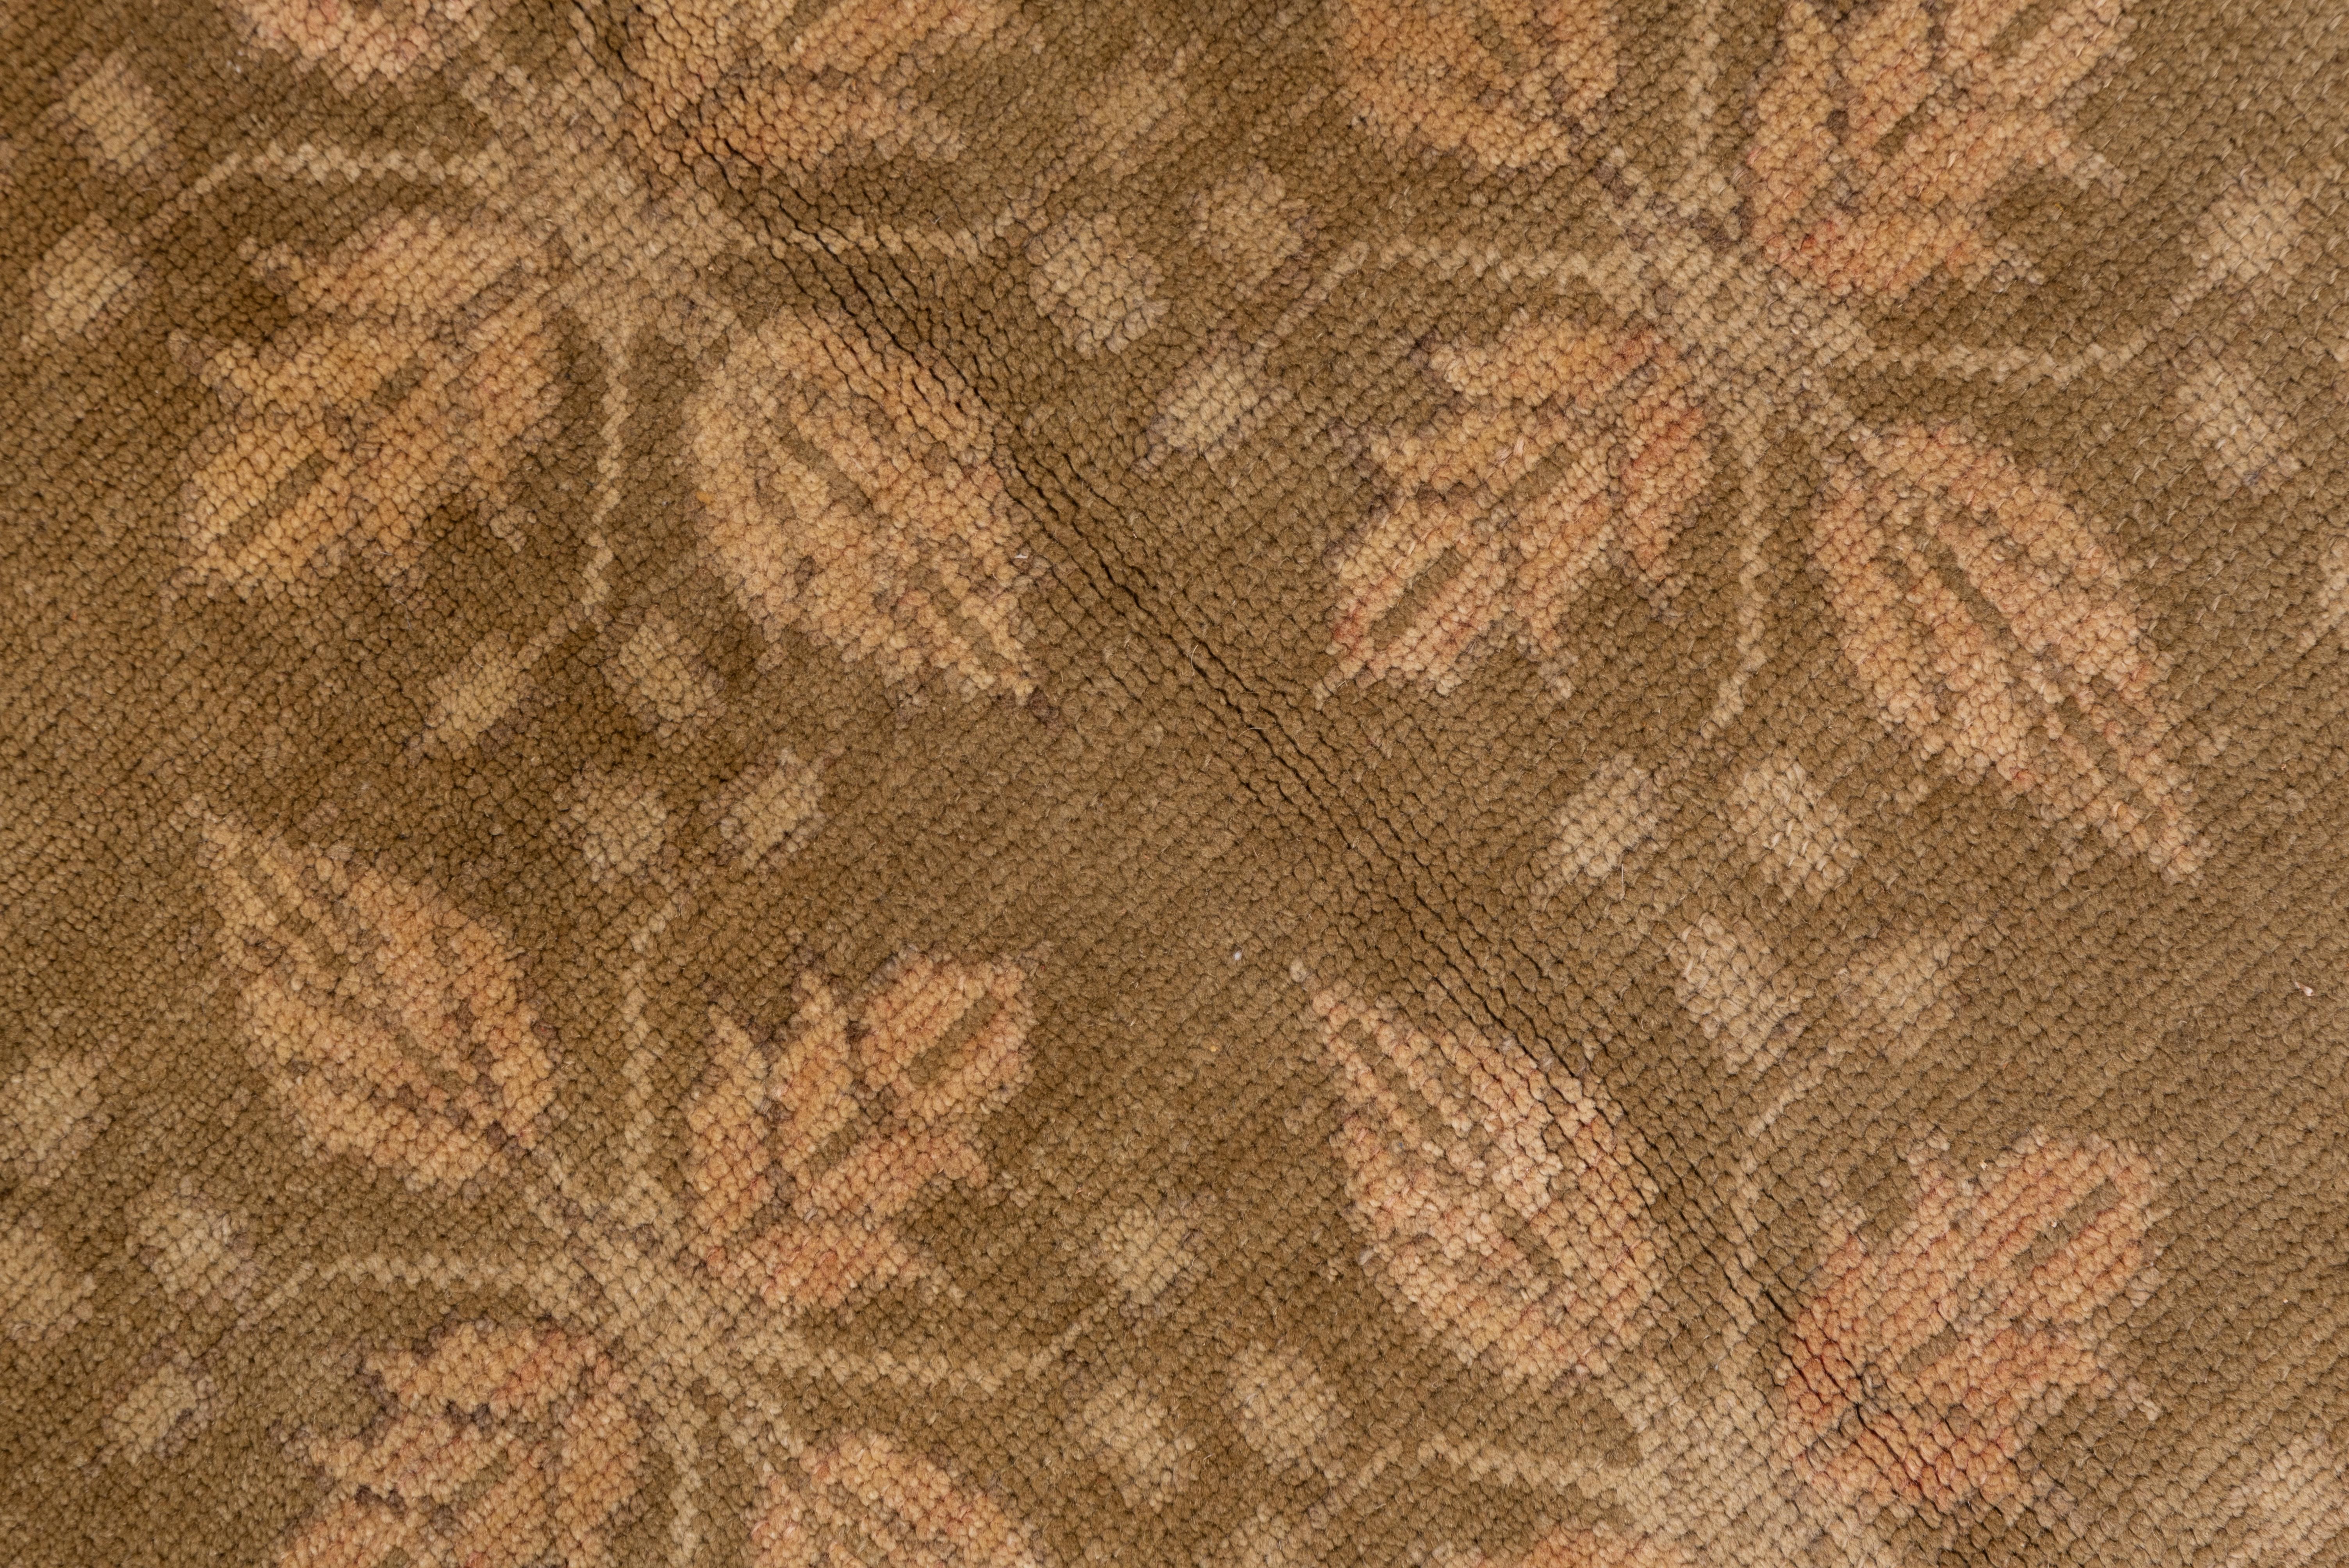 An all-over pattern of half-drop straw quatrefoil leaf motives with berry finials covers the grassy olive green ground of this vintage Turkish small carpet, framed by a brownish-grey border with an attenuated flowering Meander, rosettes, and